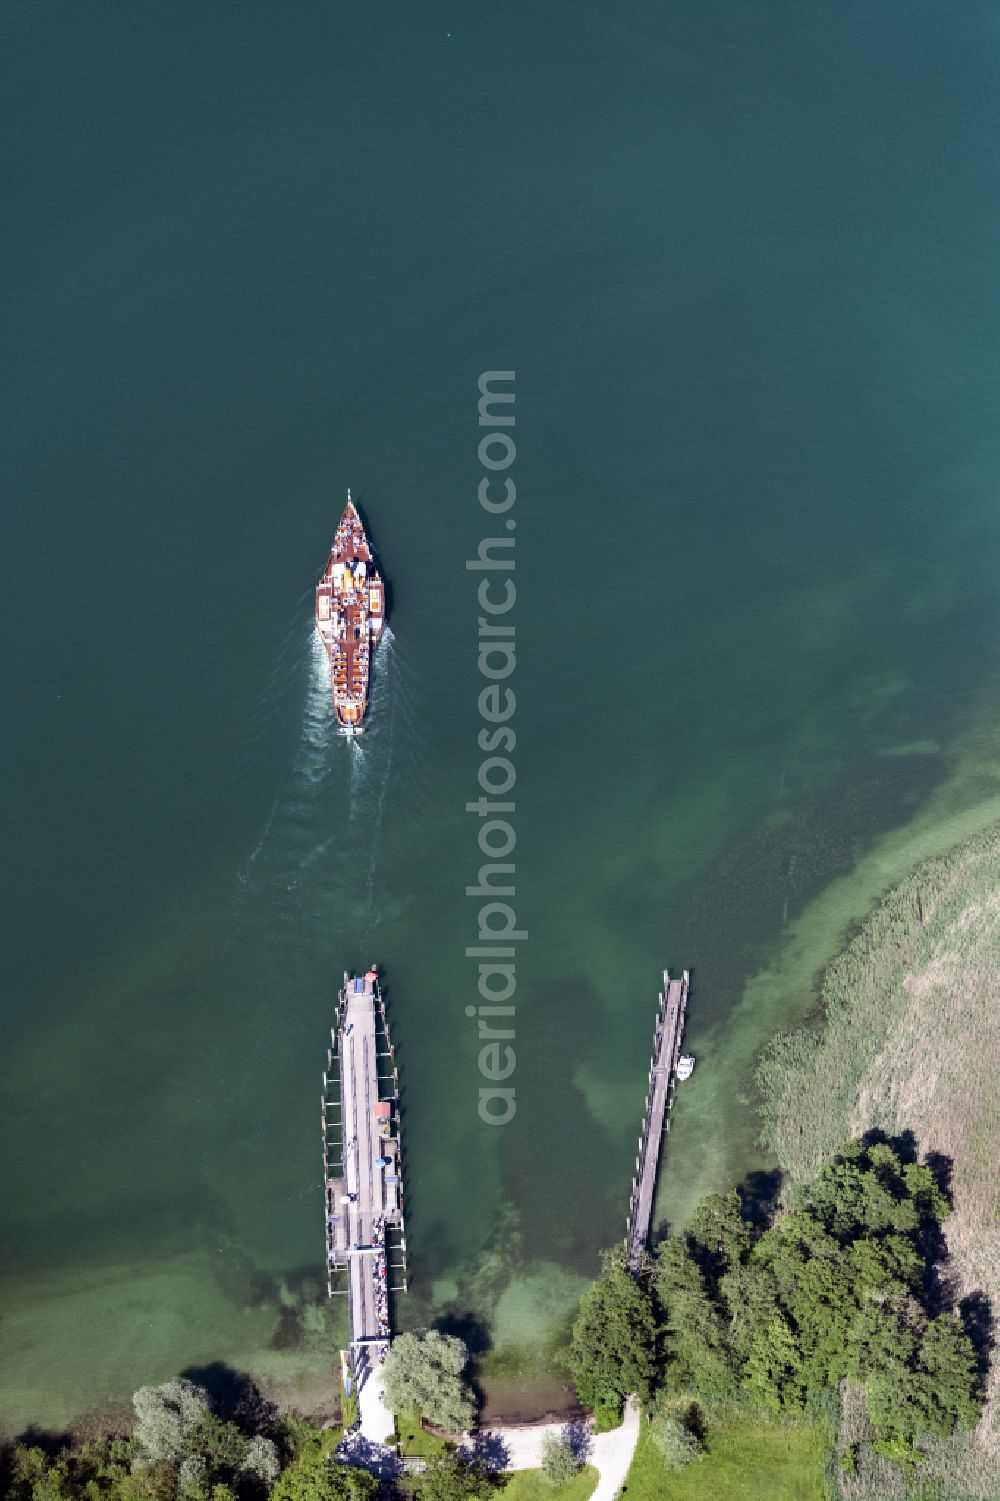 Chiemsee from above - Passenger ship Raddampfer Ludwig Fessler in Chiemsee in the state Bavaria, Germany